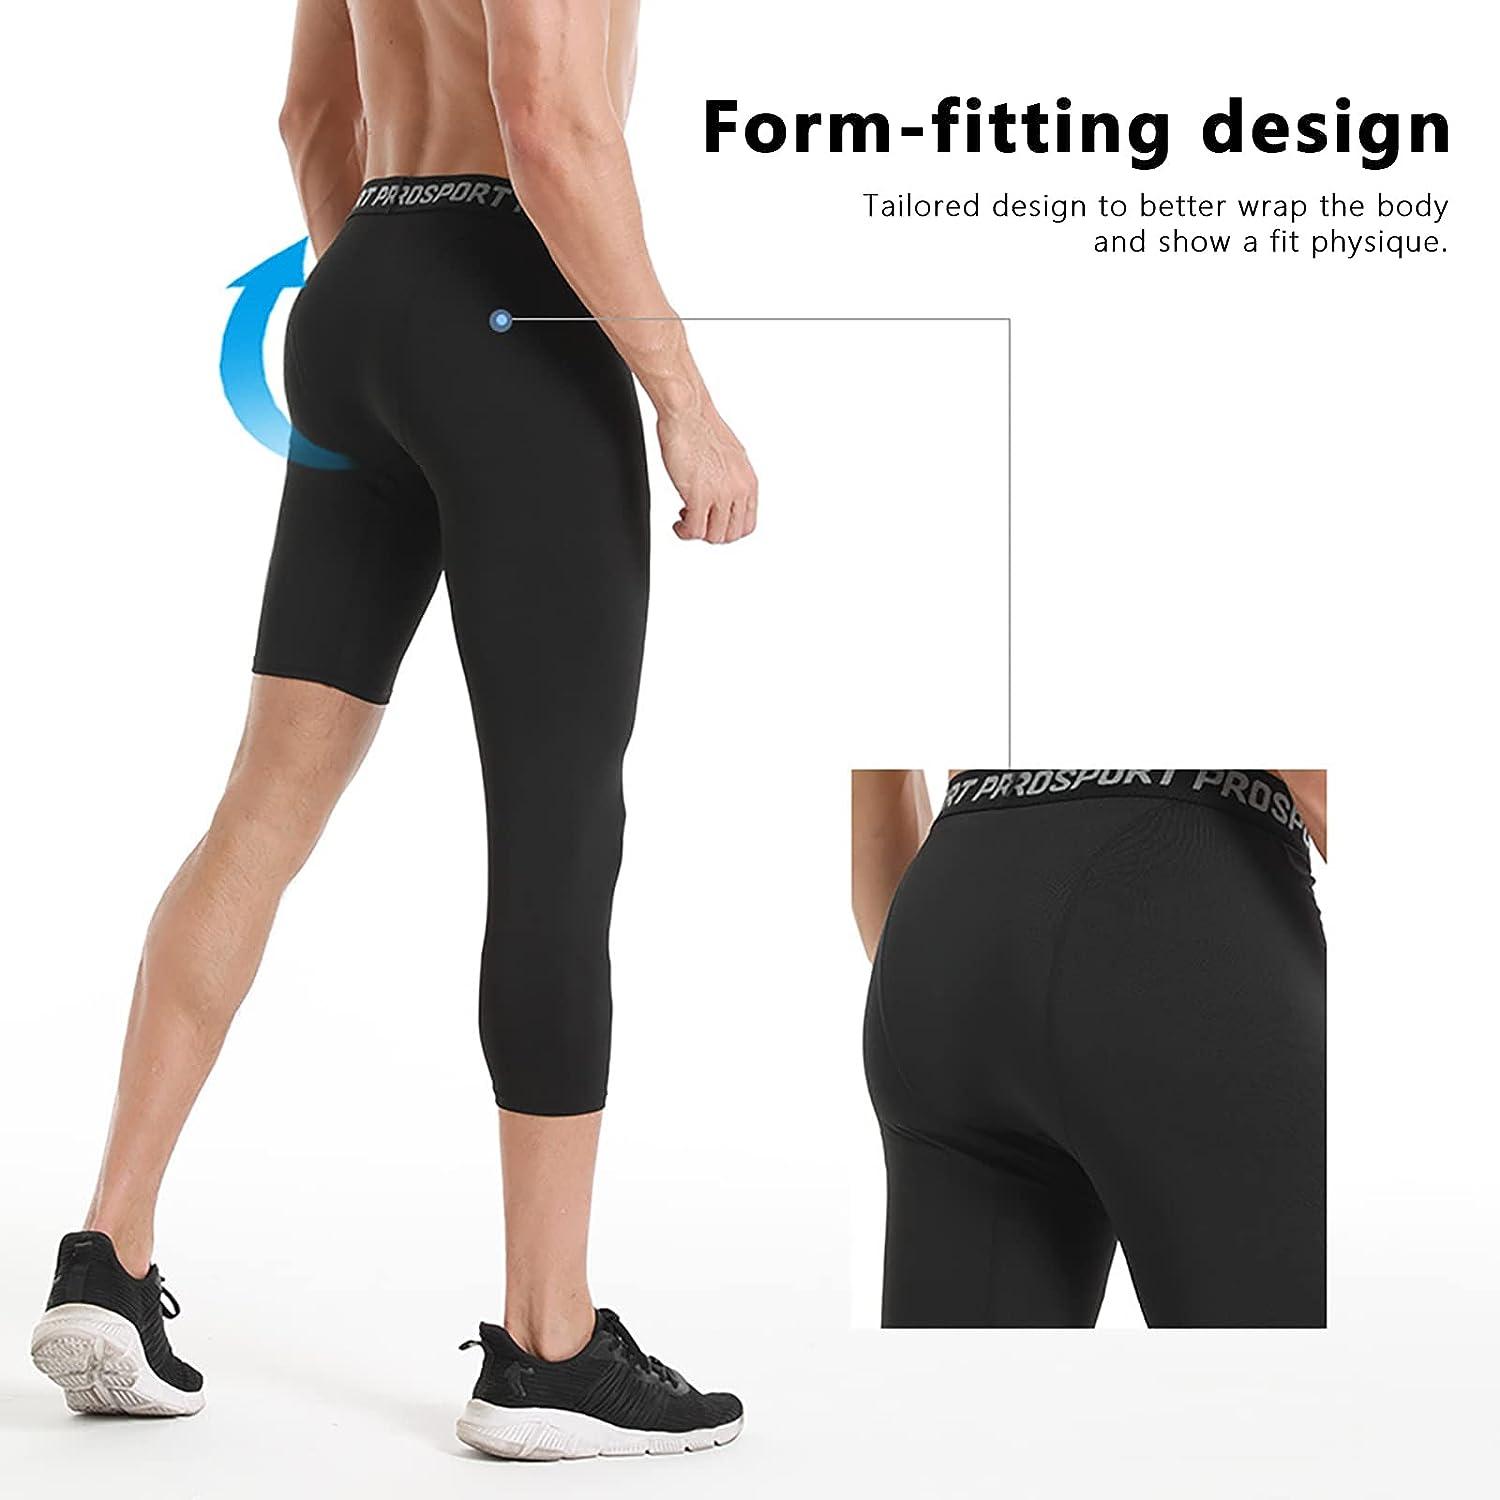  Base Layers & Compression: Clothing, Shoes & Jewelry:  Compression Tops, Compression Pants & Tights & More